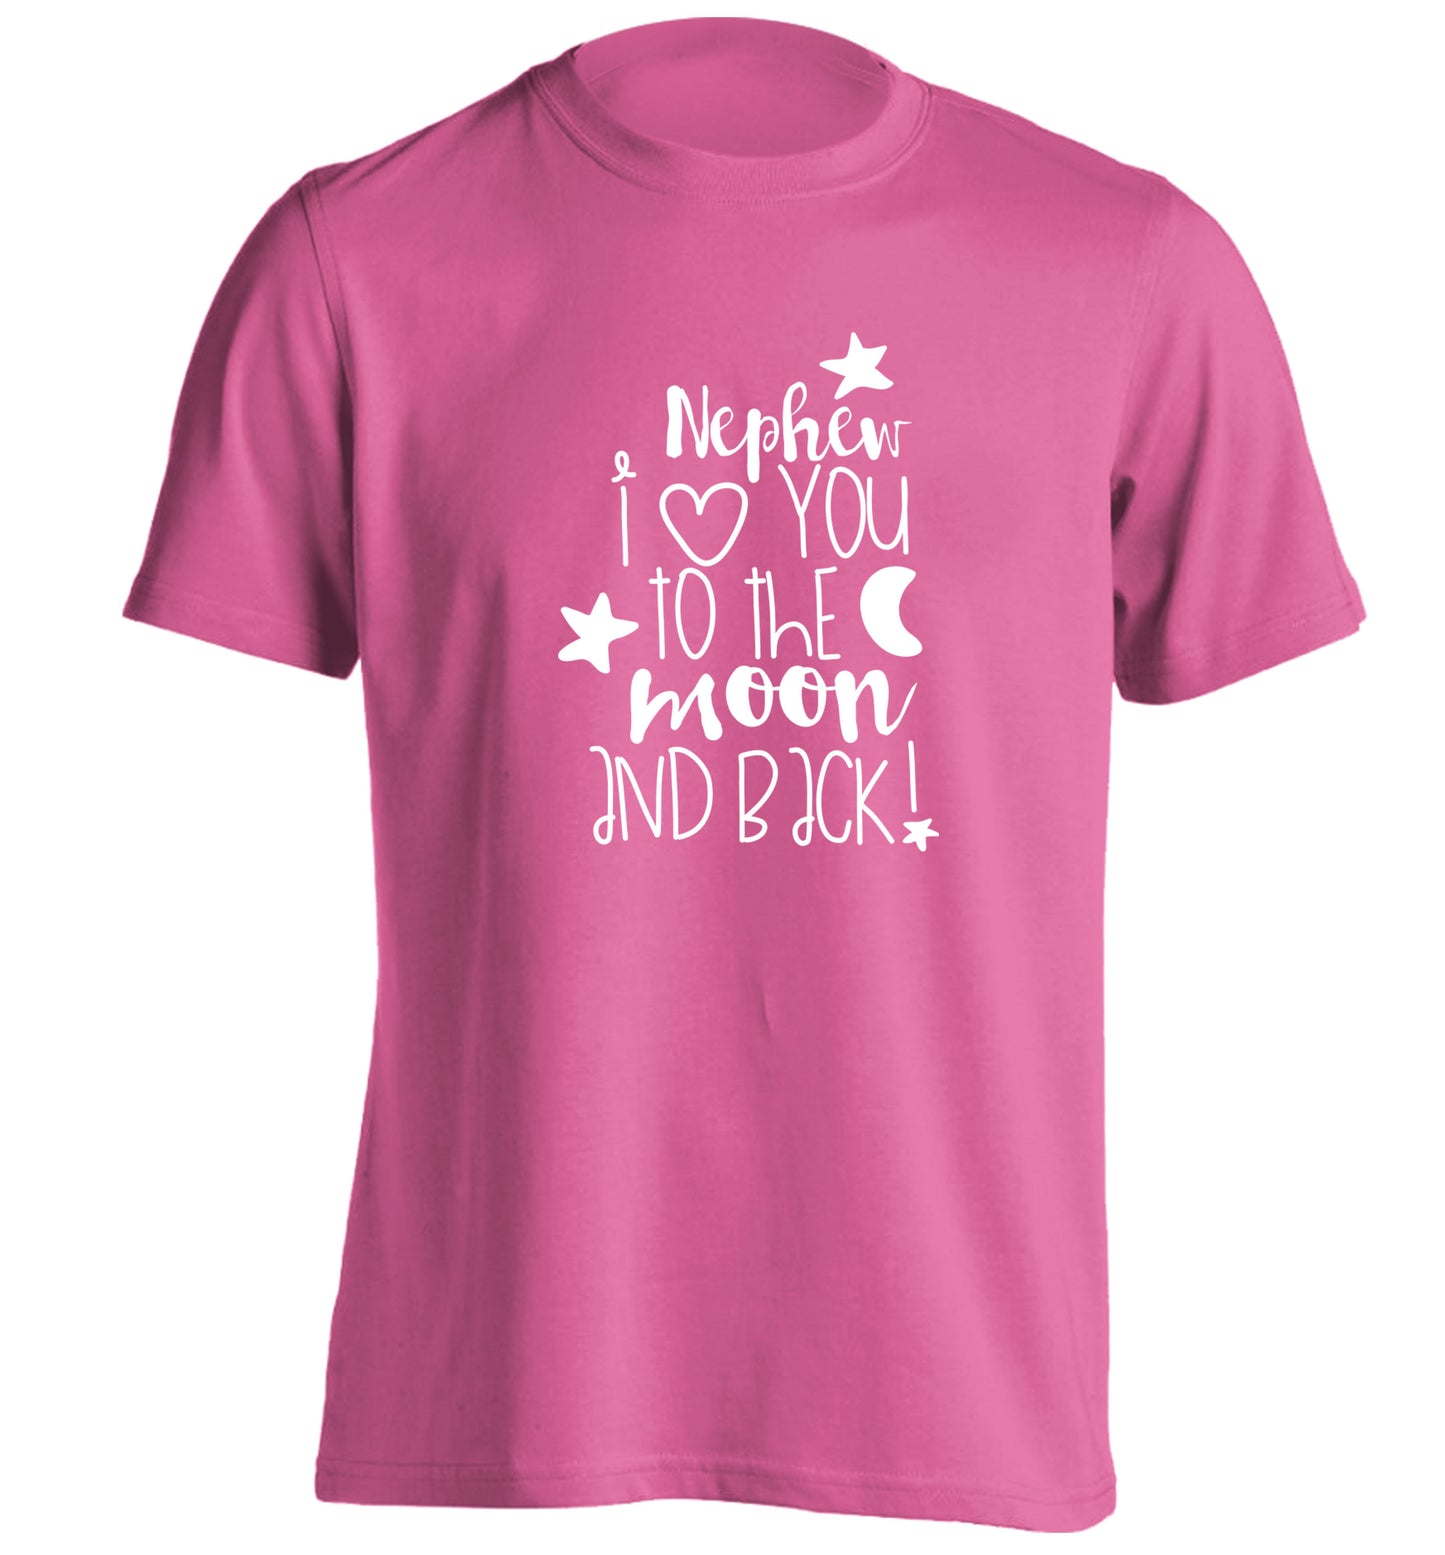 Nephew I love you to the moon and back adults unisex pink Tshirt 2XL